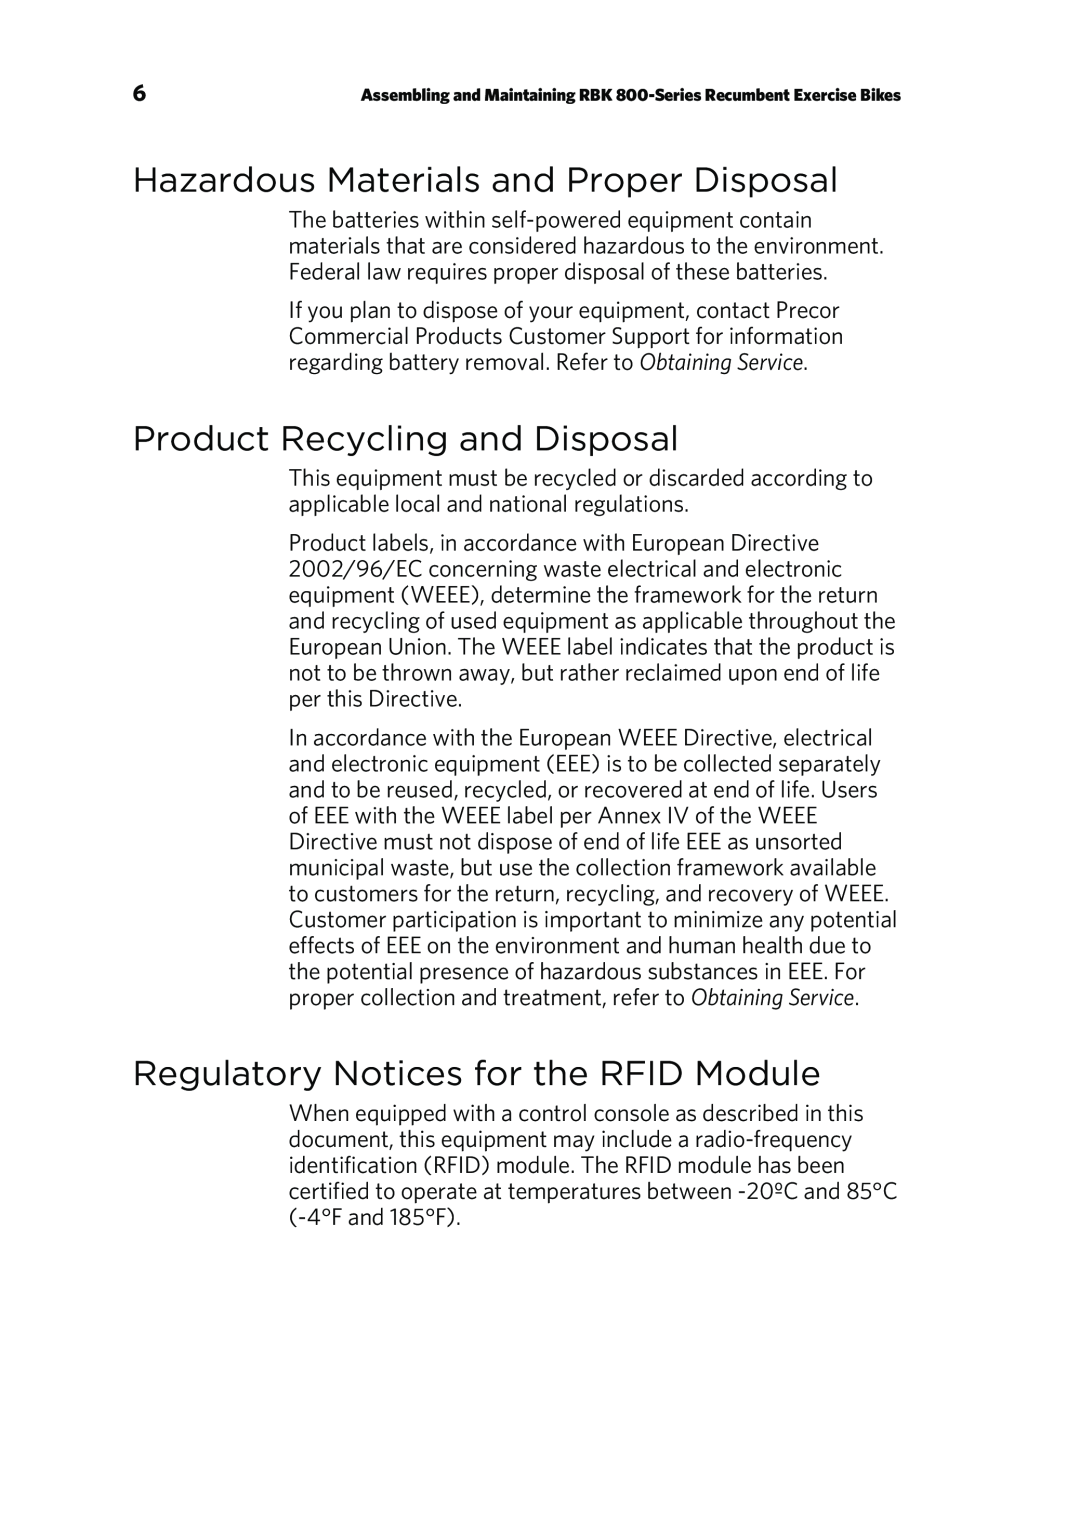 Precor P80 Hazardous Materials and Proper Disposal, Product Recycling and Disposal, Regulatory Notices for the RFID Module 